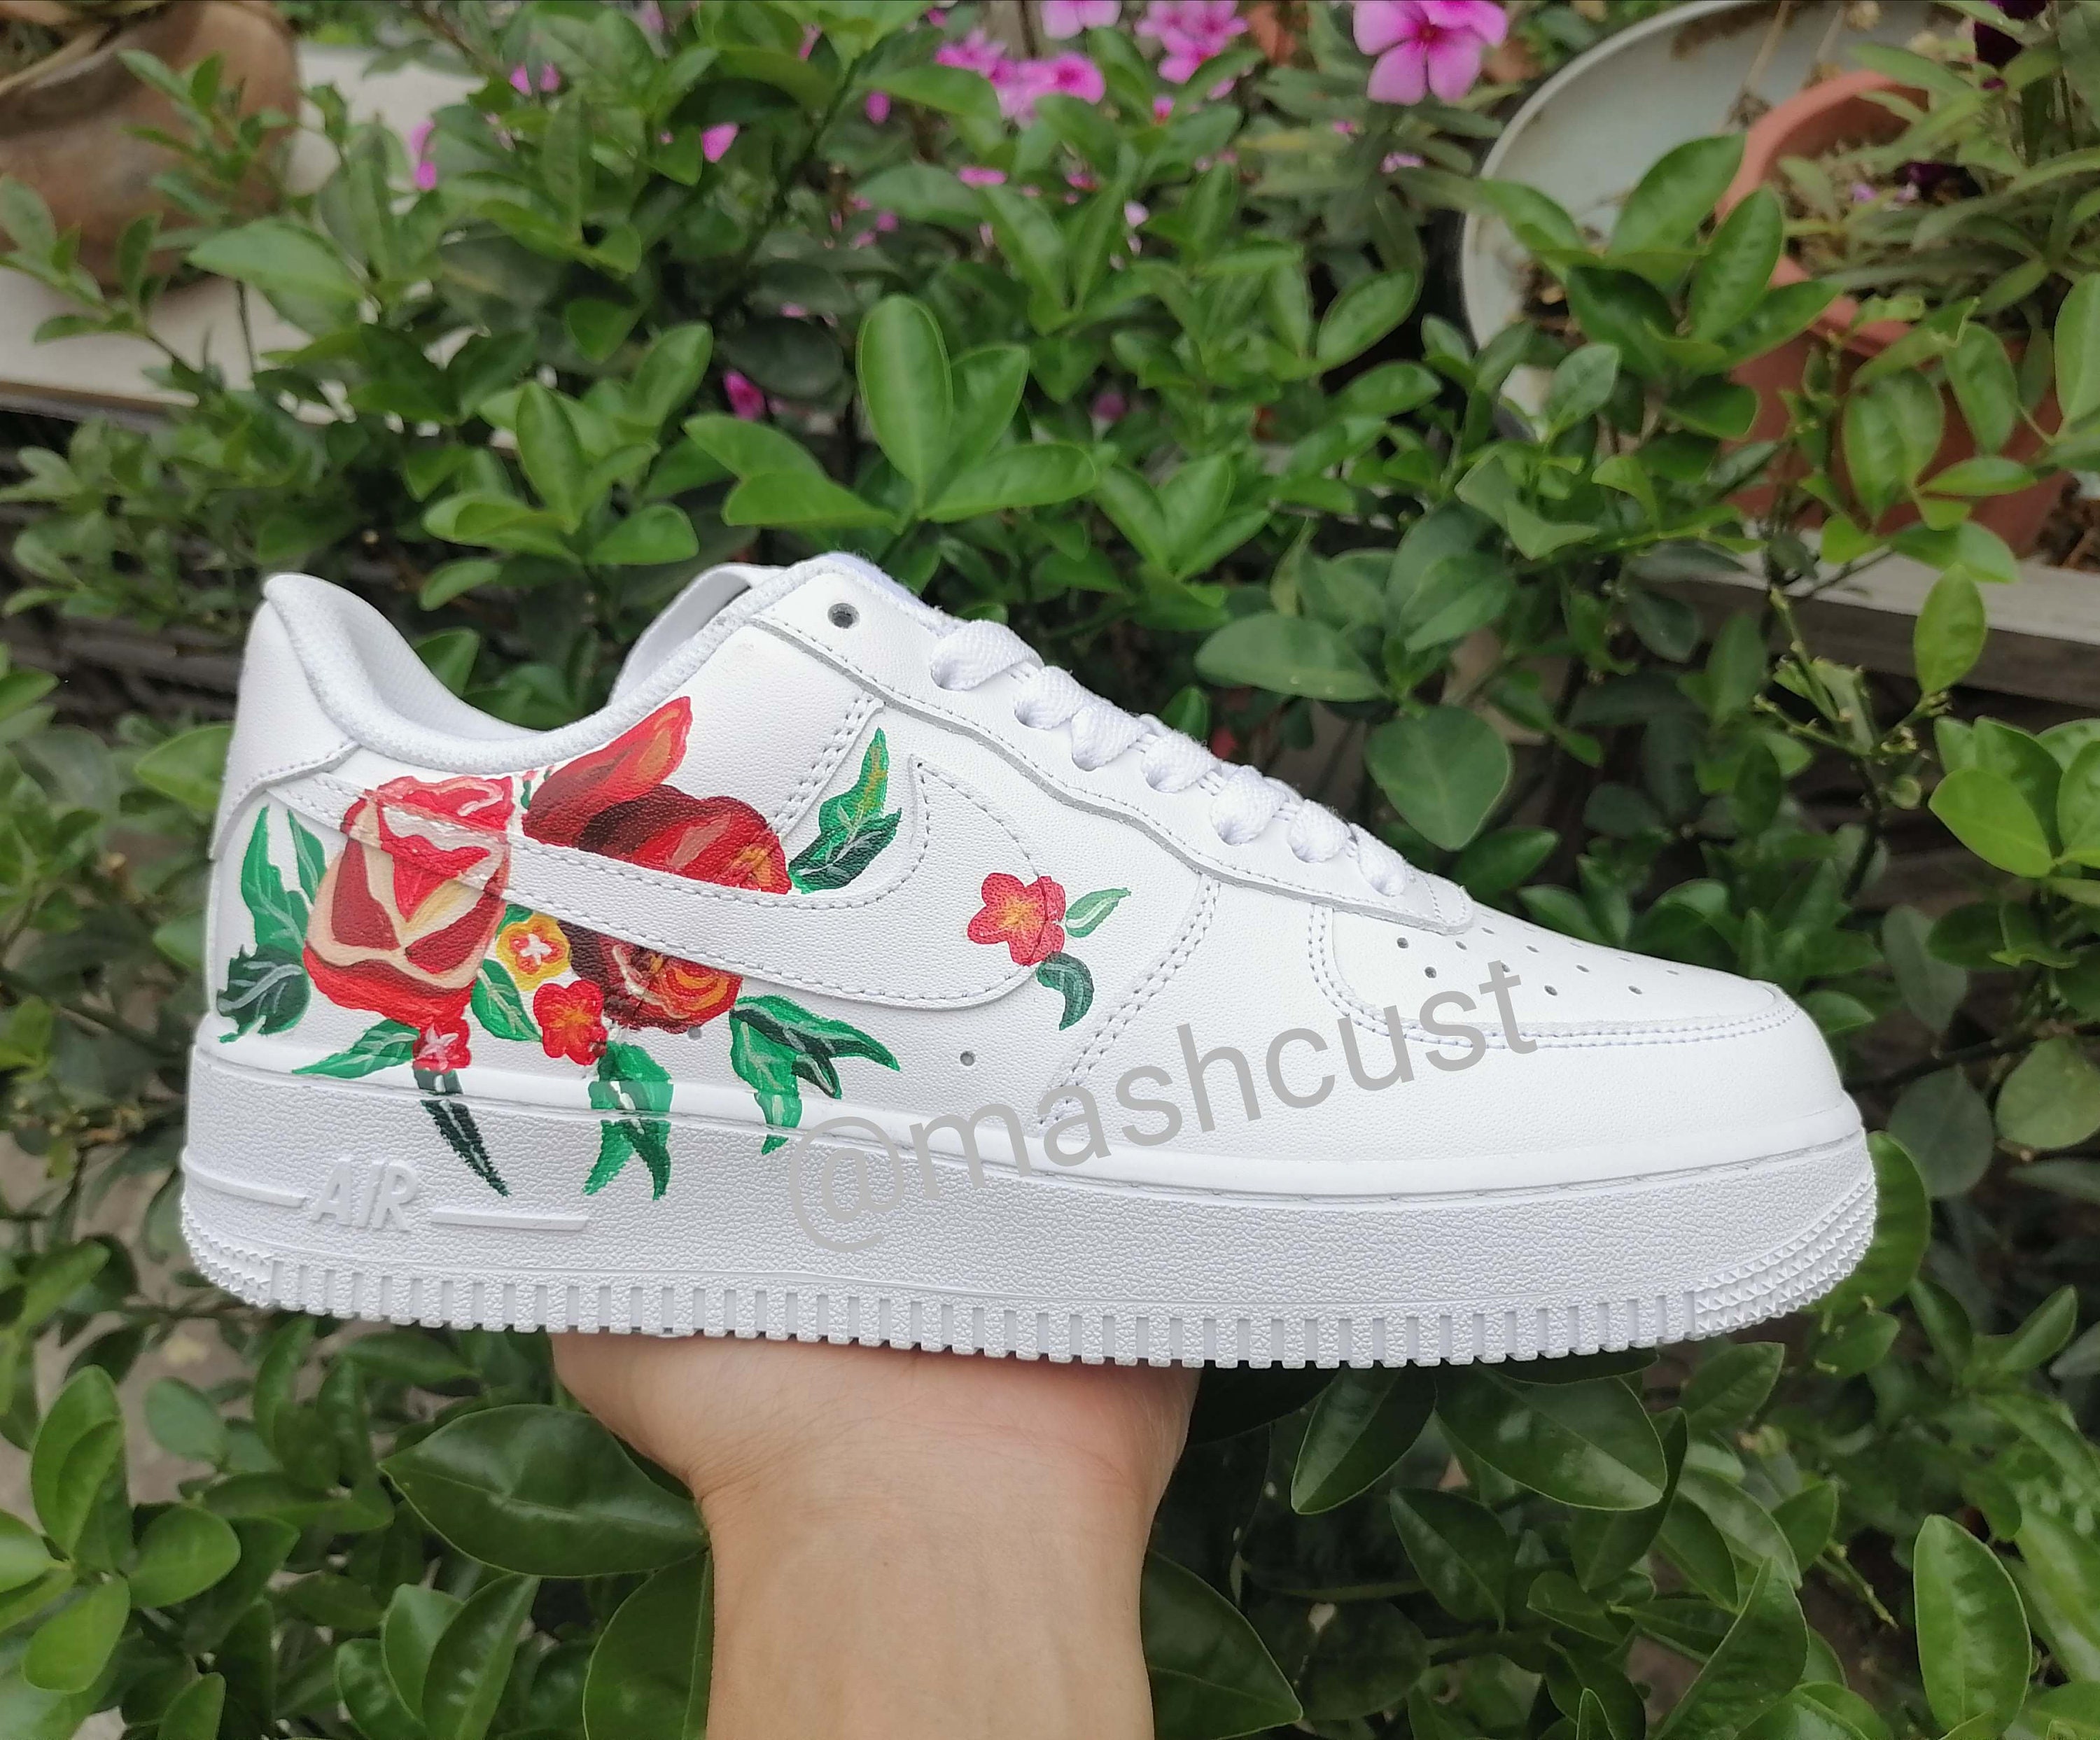 Custom Sneakers Nike Air Force 1s Painted Floral Shoes For | Etsy